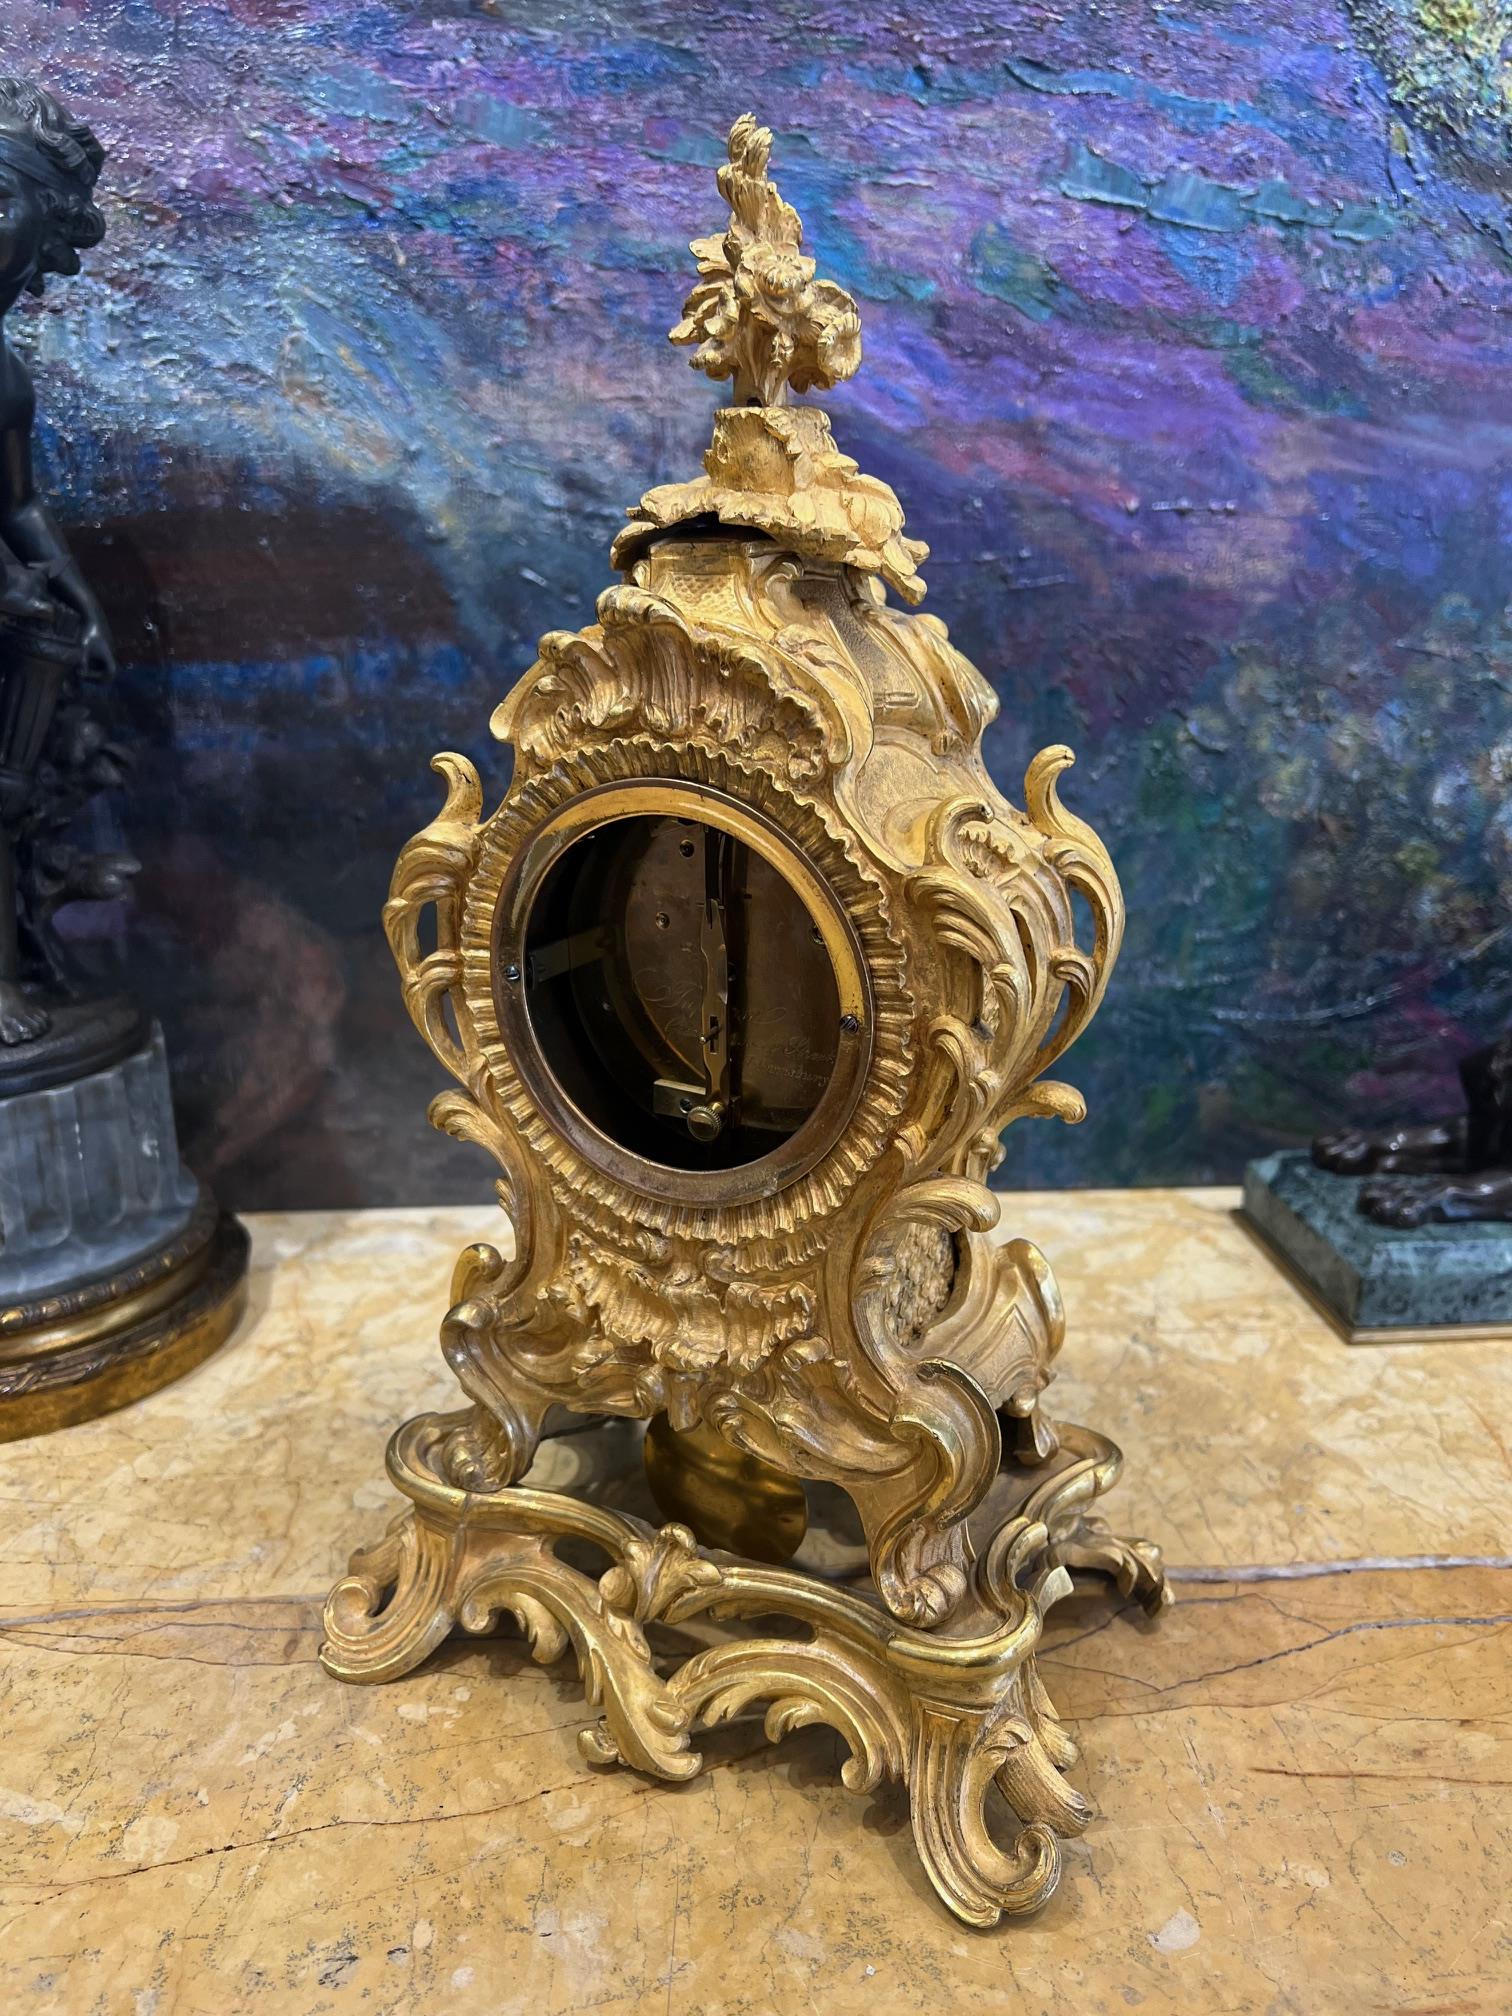 AN EARLY 19TH CENTURY ENGLISH GILT BRONZE FUSEE MANTEL CLOCK - Image 4 of 8